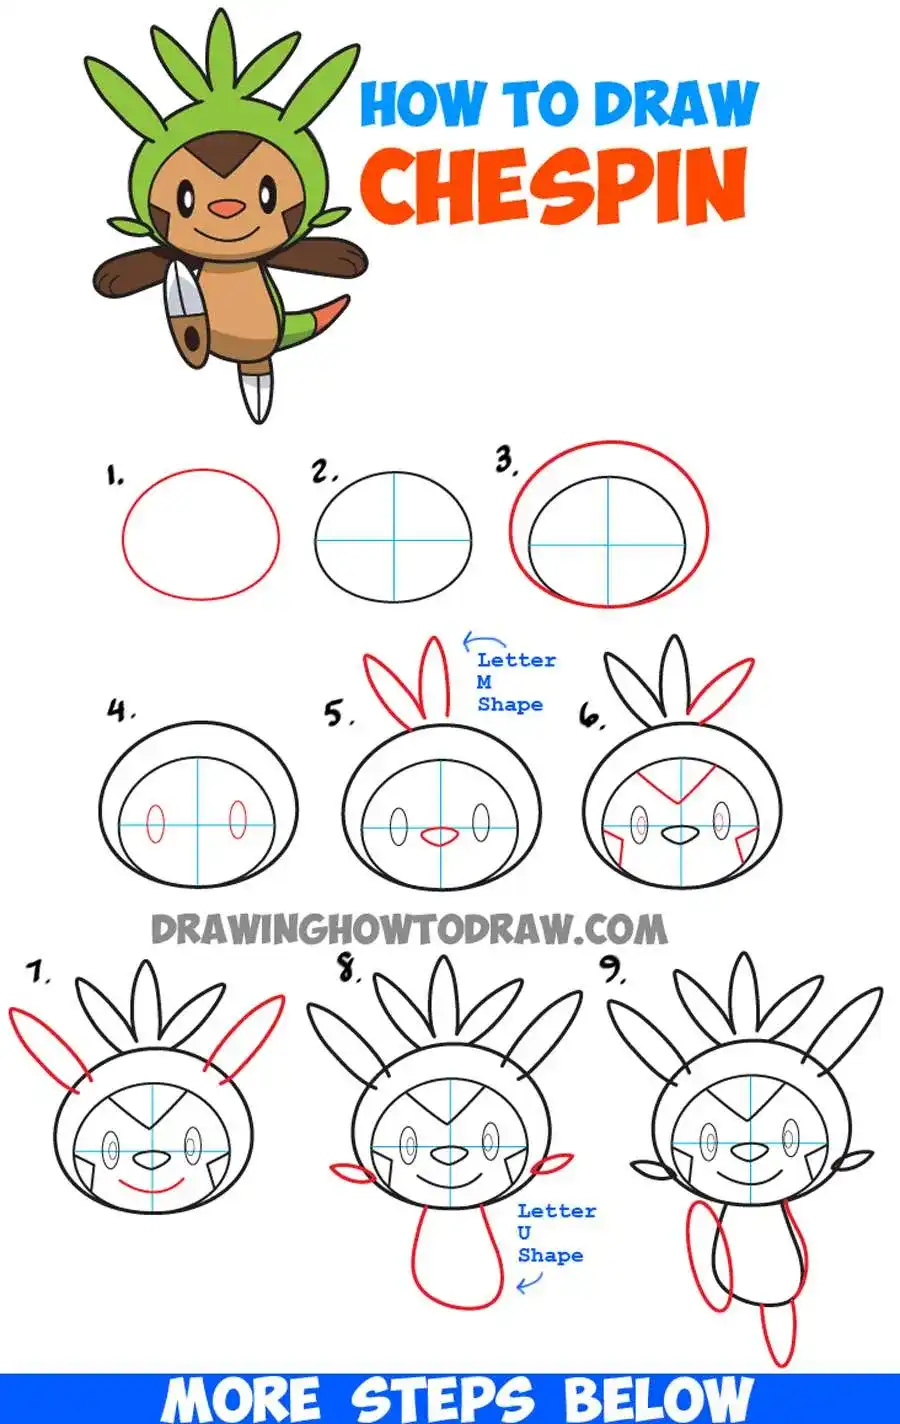 How to Draw Chespin from Pokemon Easy Step by Step Drawing Tutorial ...